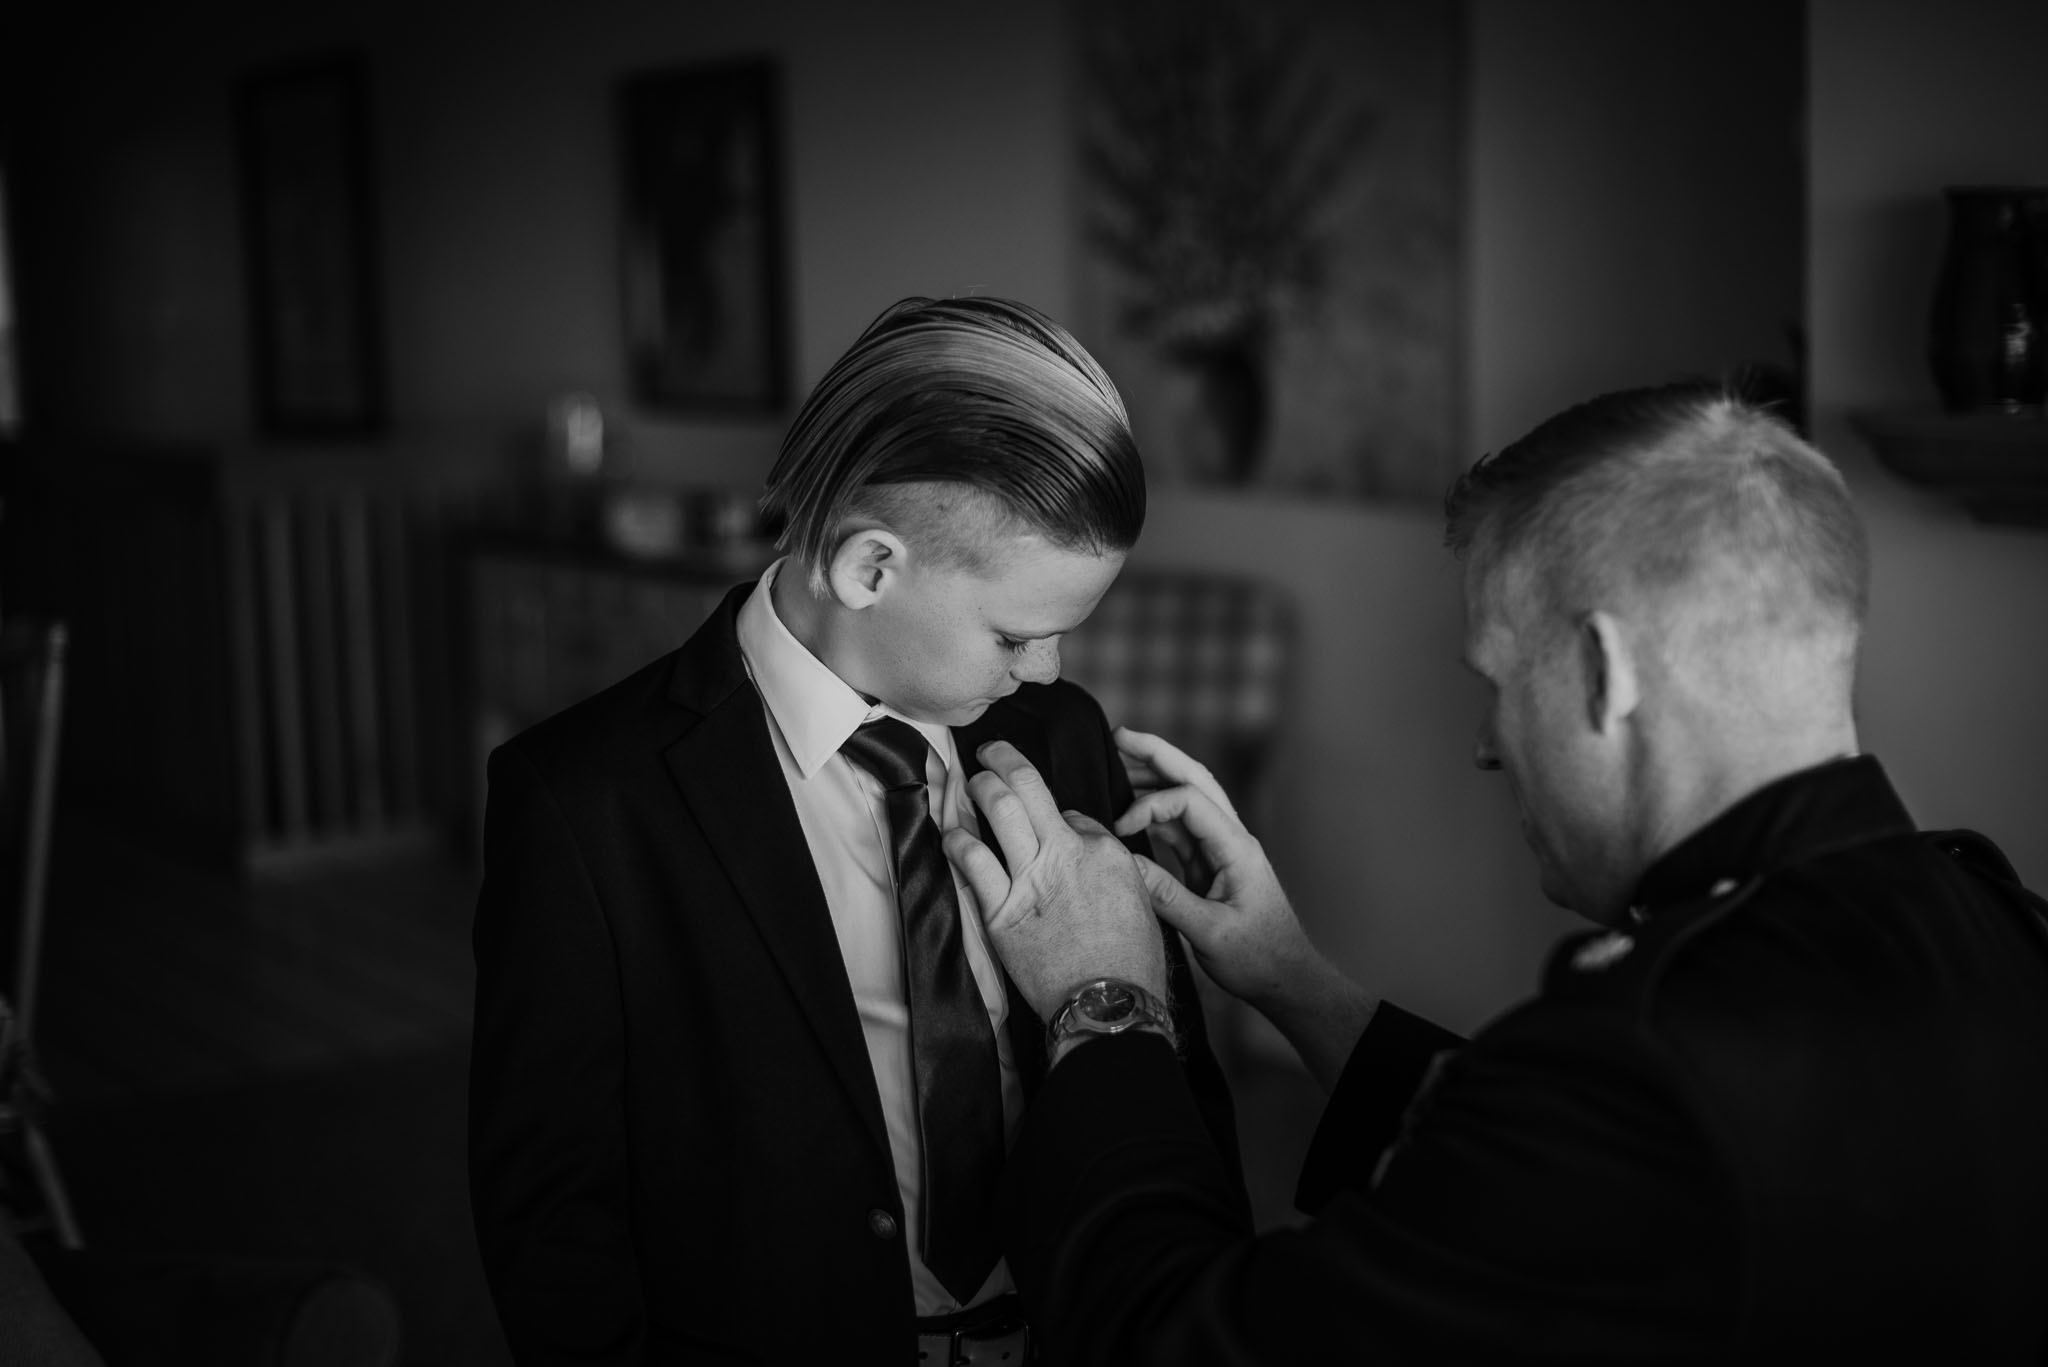 The groom helping his son with his boutonniere.